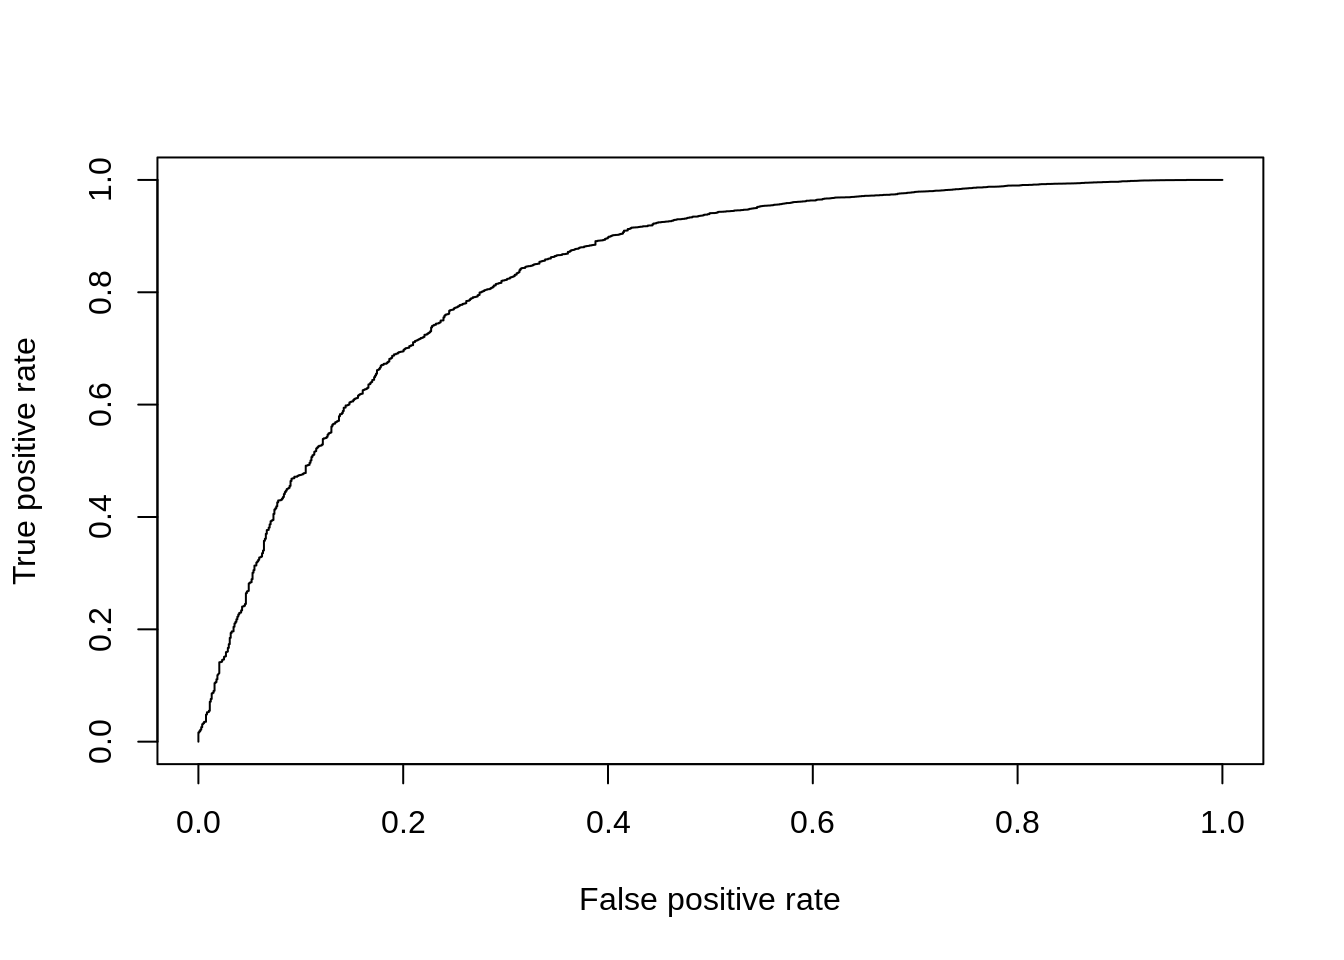 ROC curve for Wilcox test.